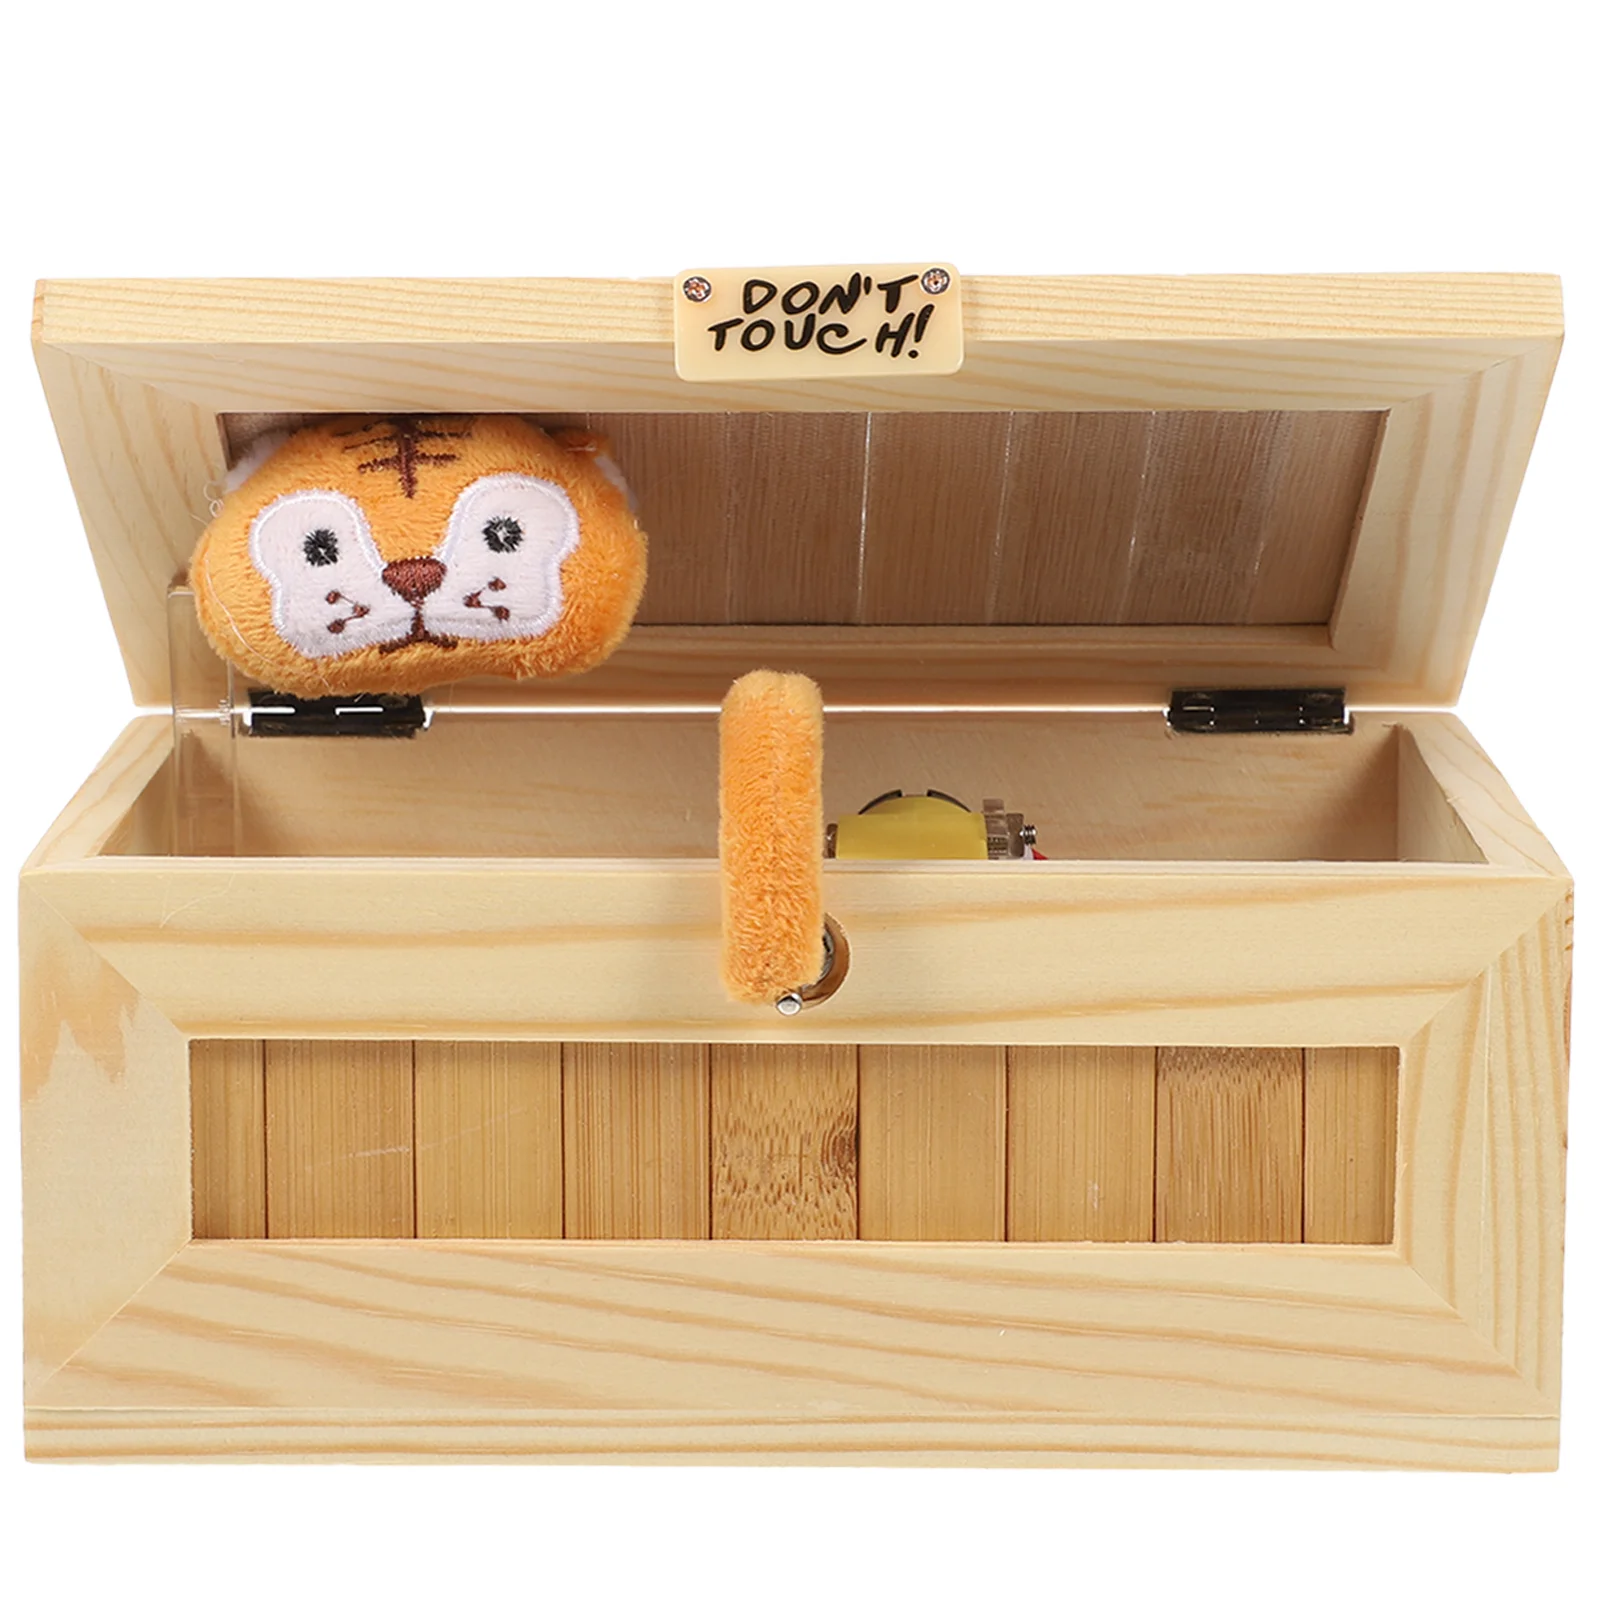 

Wood Box Tricky Toys Urban Spoof Tiger Toy Creative Toy Horror Boring Box Toy for Kids Friends Inappropriate stuff Useless gift